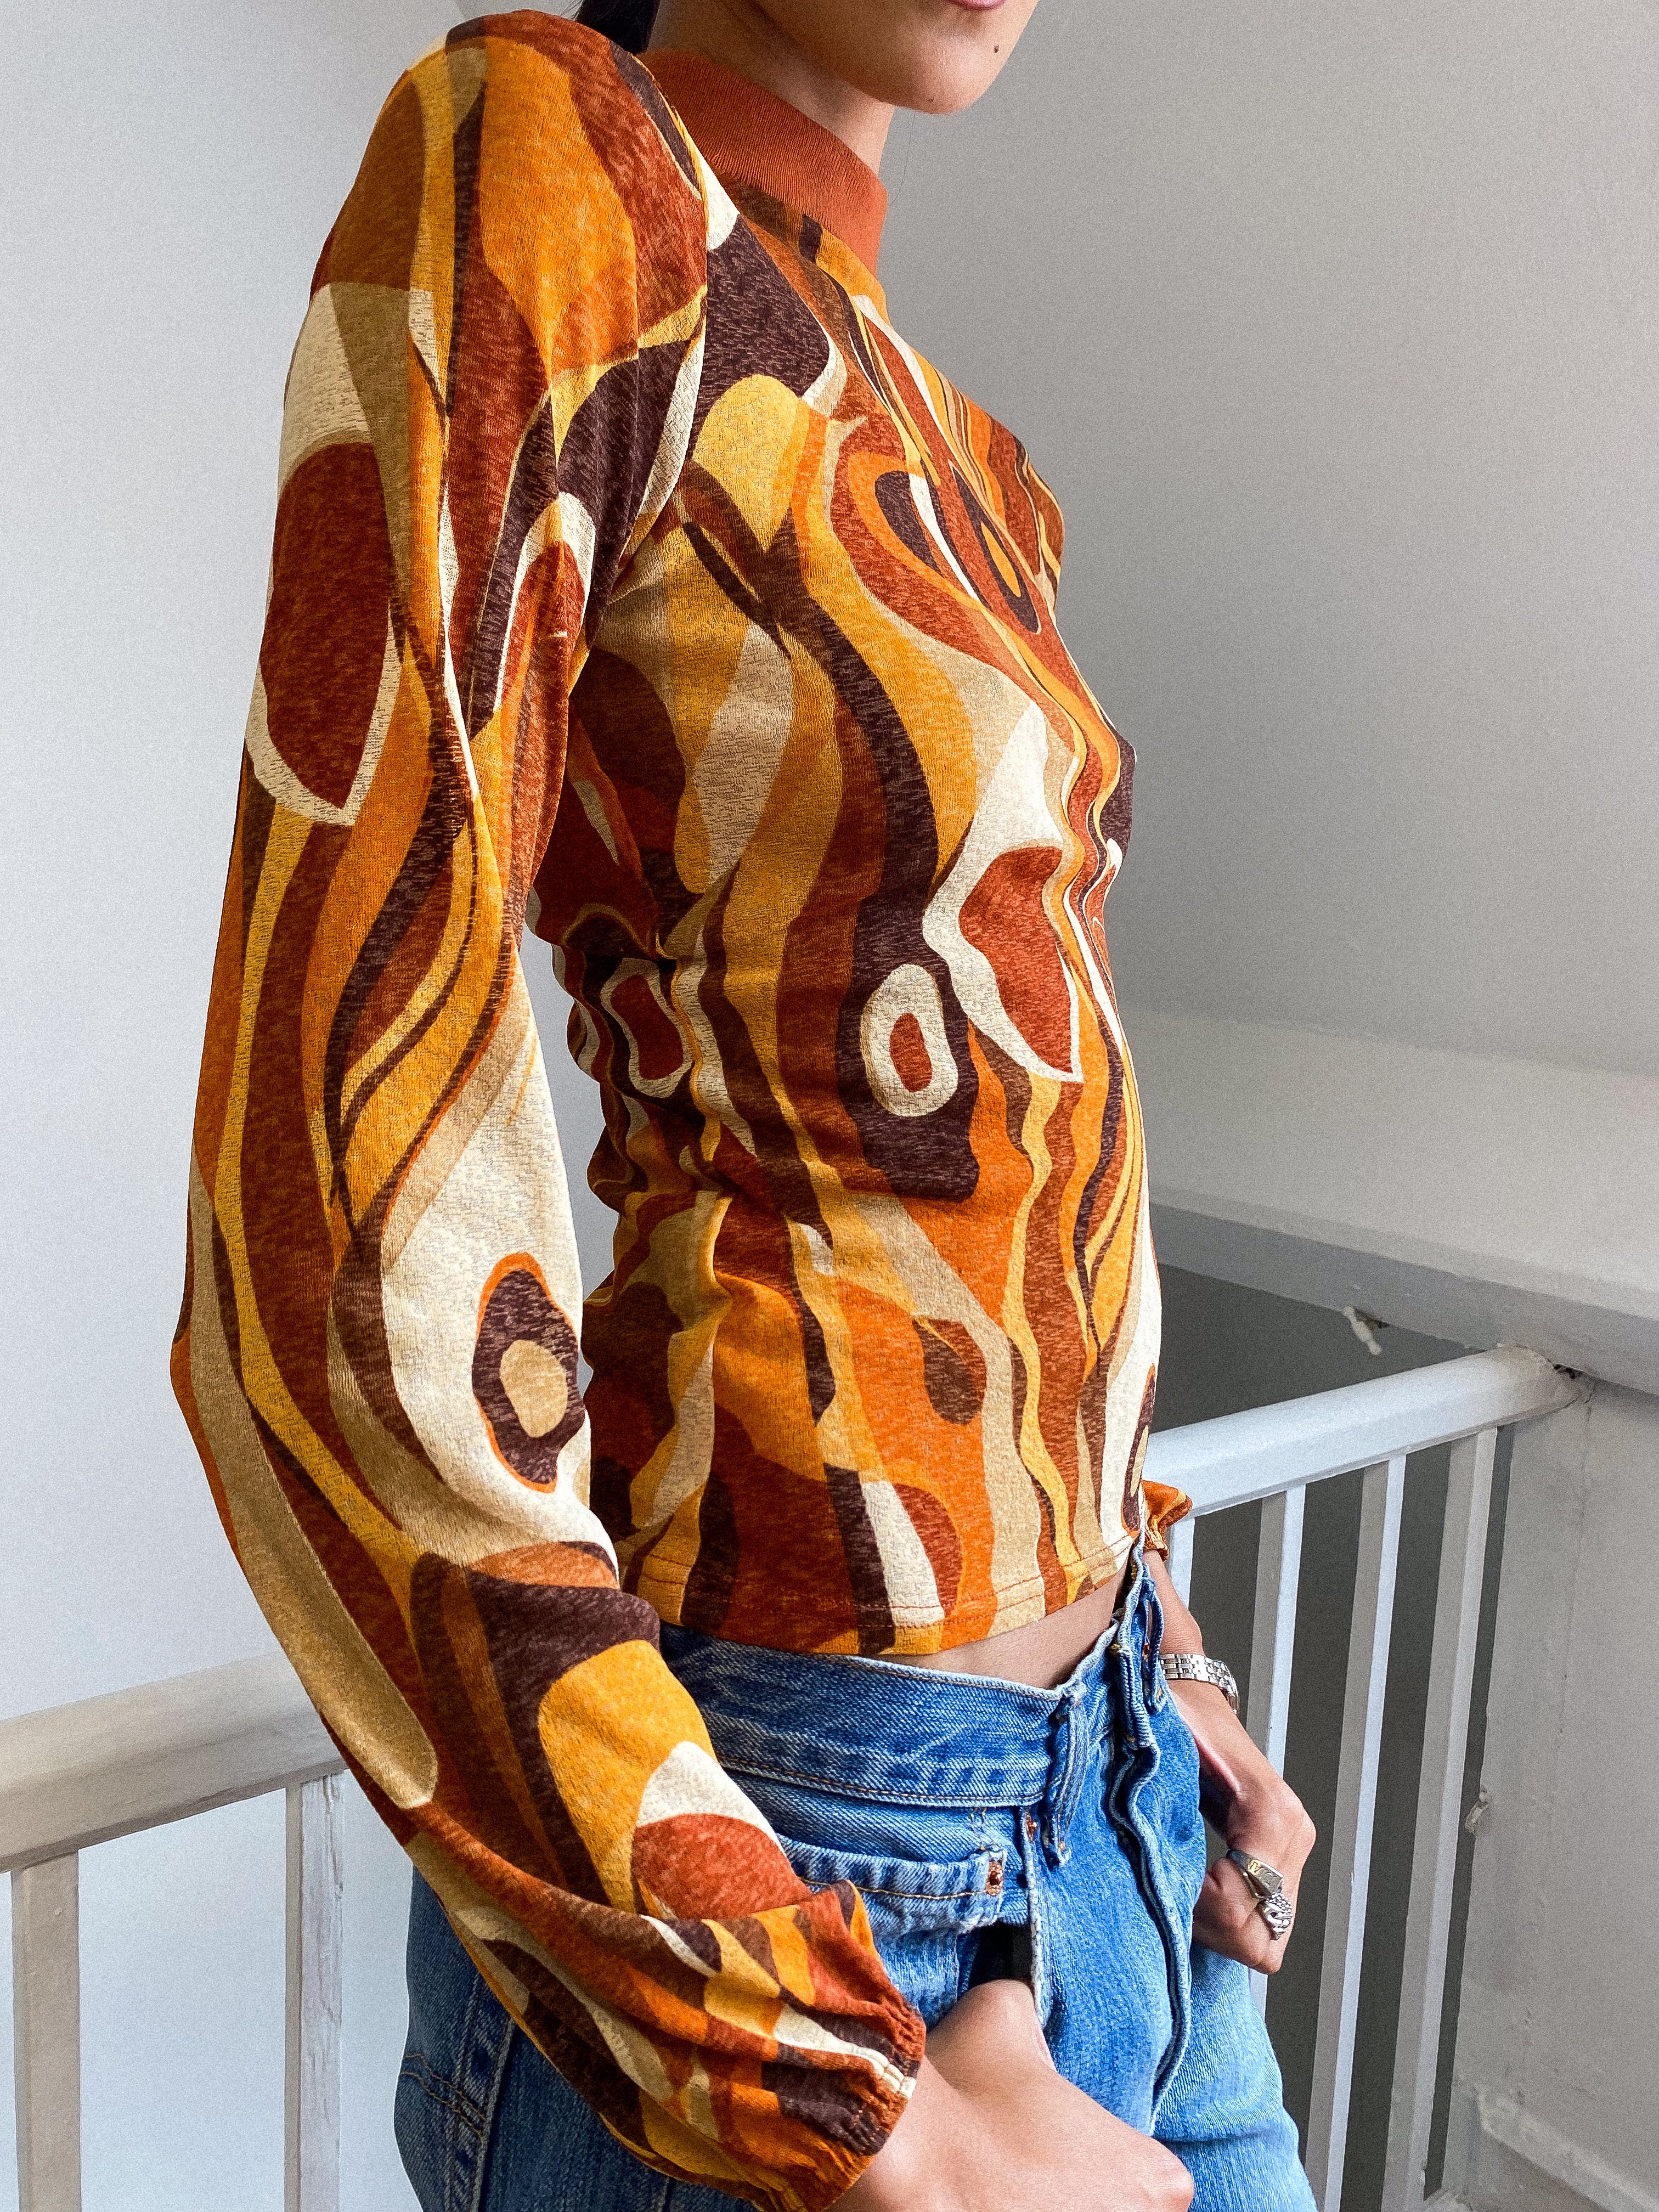 Abstract 70s Print Sheer Top Size S - M